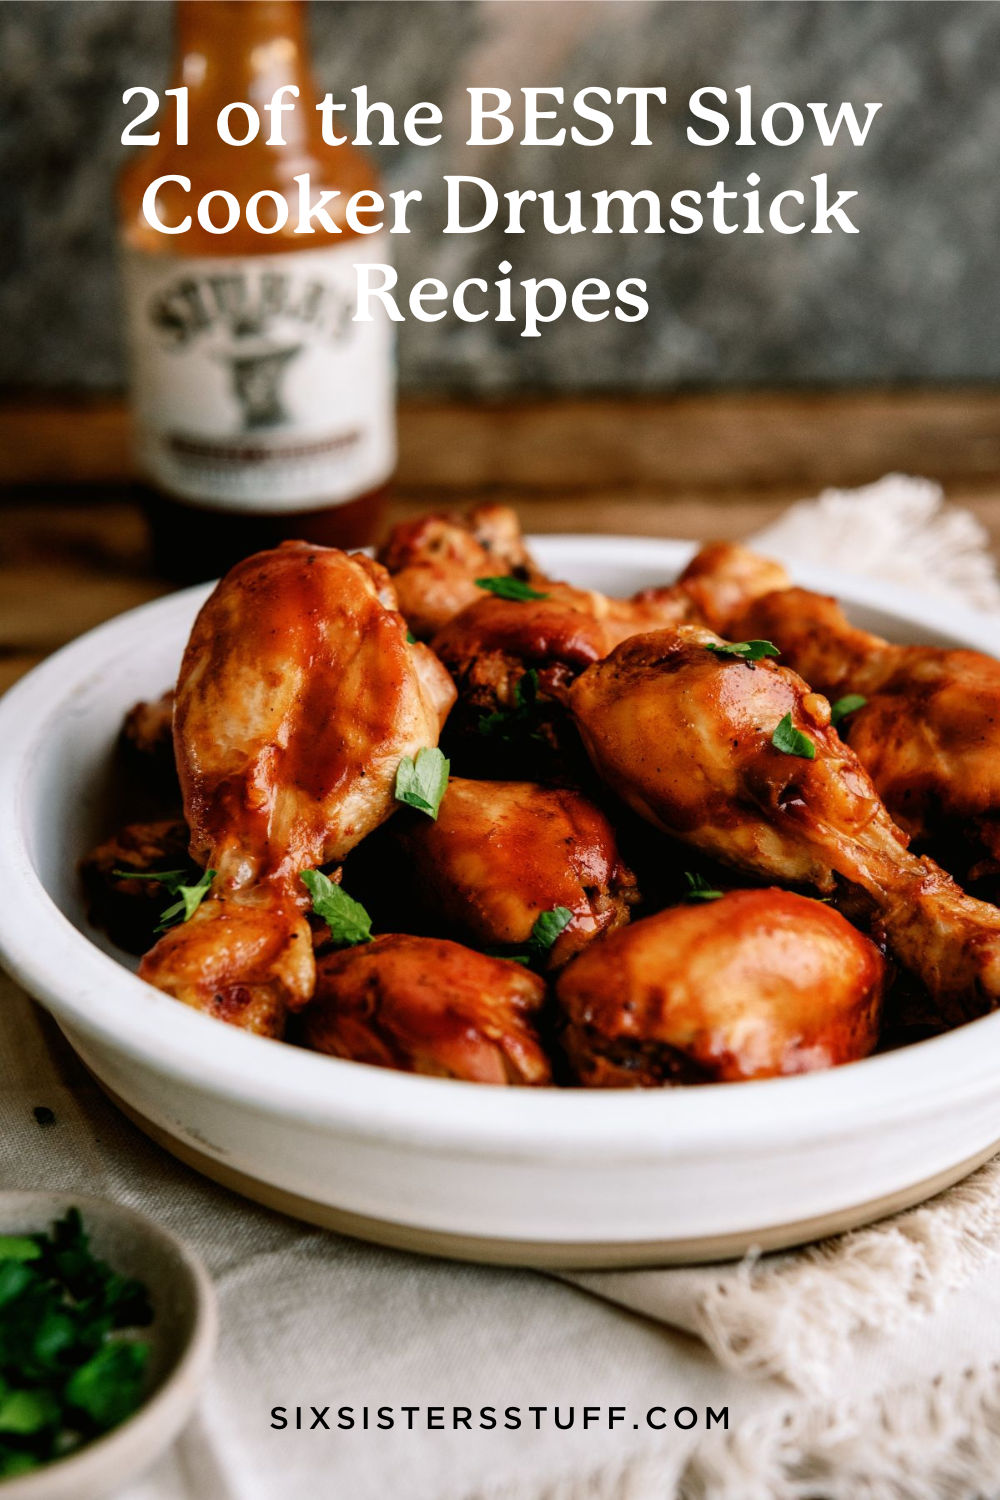 https://www.sixsistersstuff.com/wp-content/uploads/2023/06/21-of-the-BEST-Slow-Cooker-Drumstick-Recipes.png